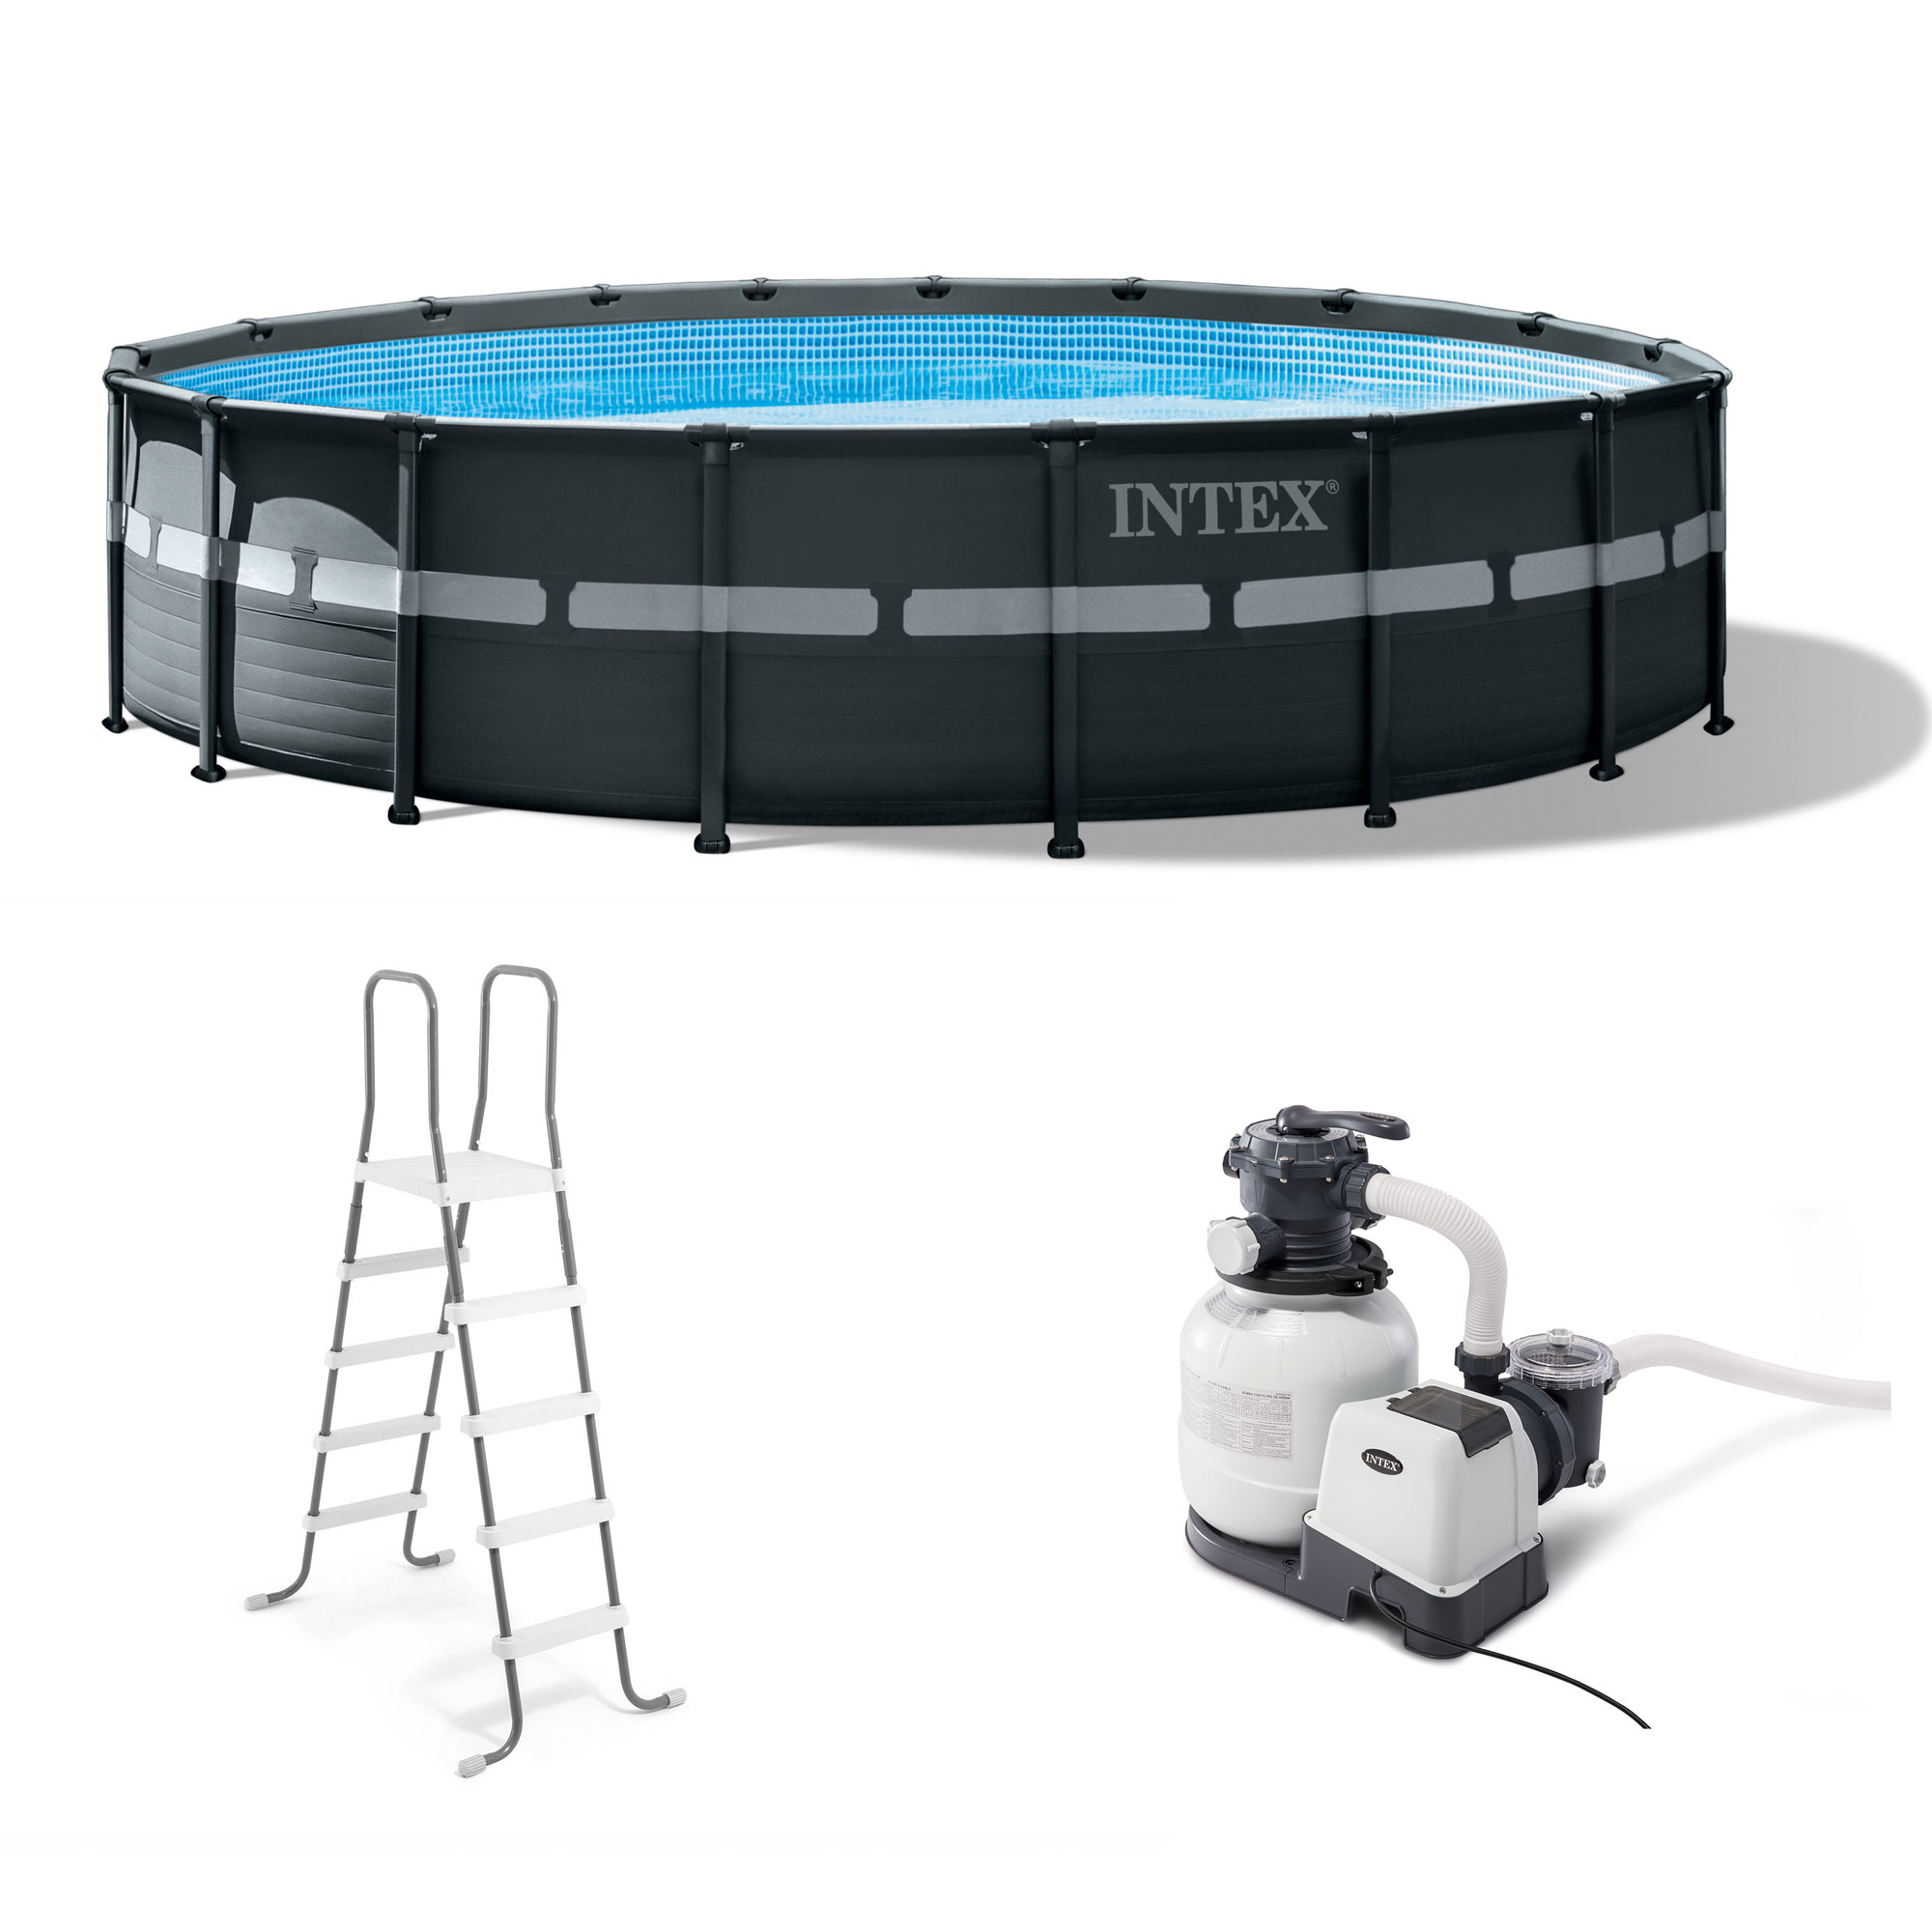 Intex 18Ft x 52In Ultra XTR Frame Round Above Ground Swimming Pool Set with Pump - image 1 of 12